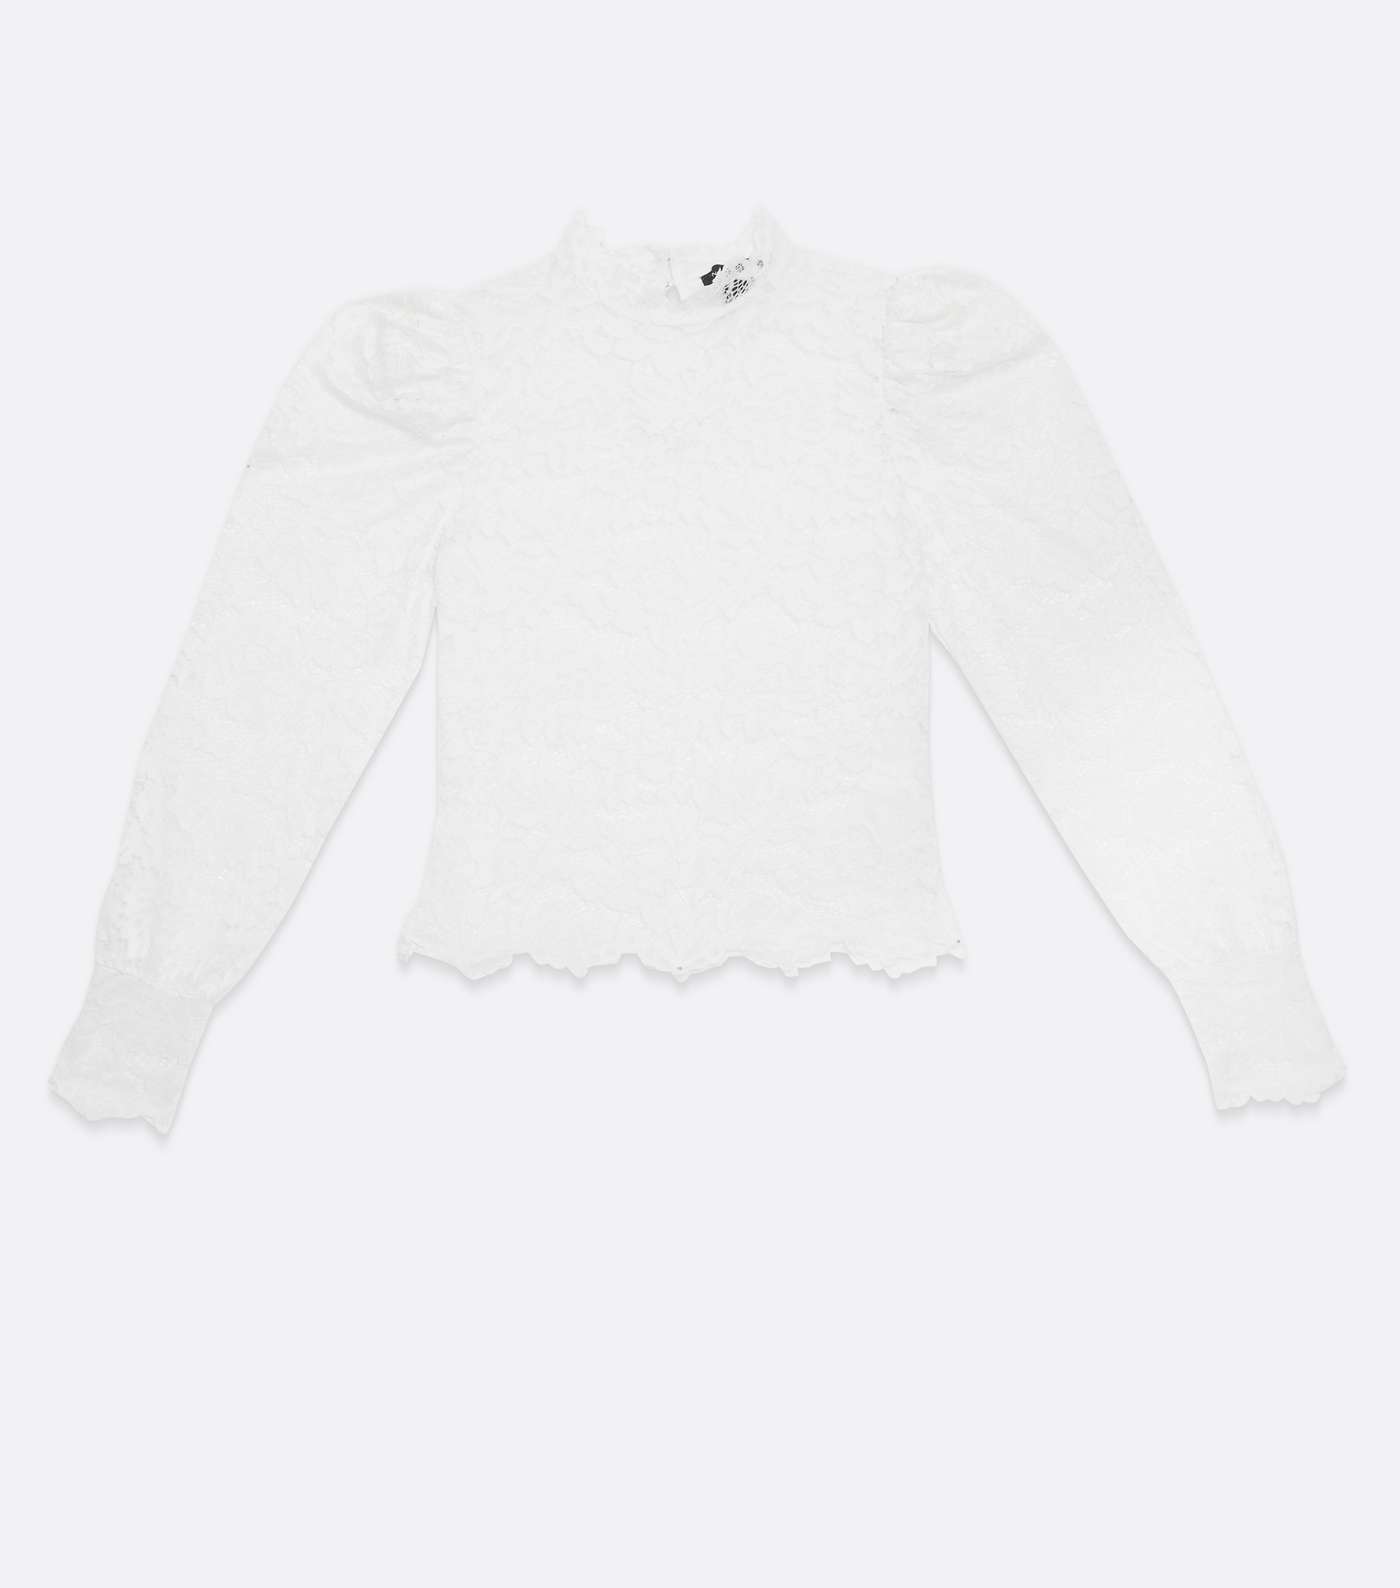 Off White Floral Lace High Neck Scallop Top Image 5